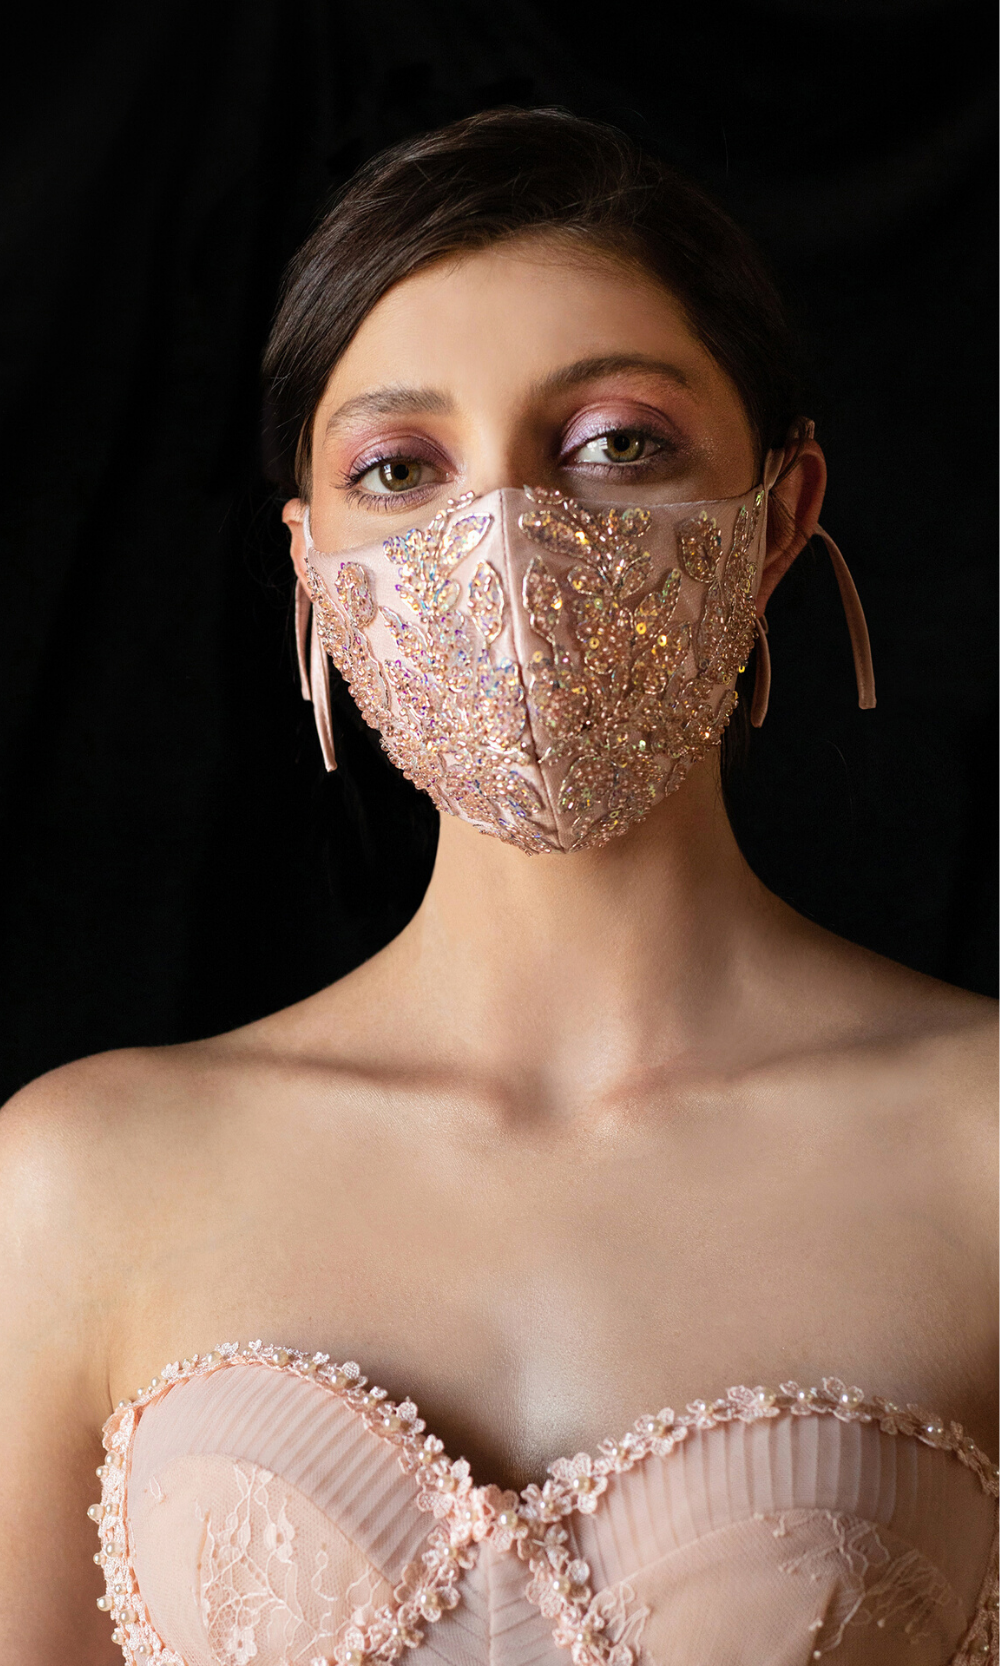 Blush sequin beaded mask for wedding, prom, special occasion, court wedding, backyard wedding